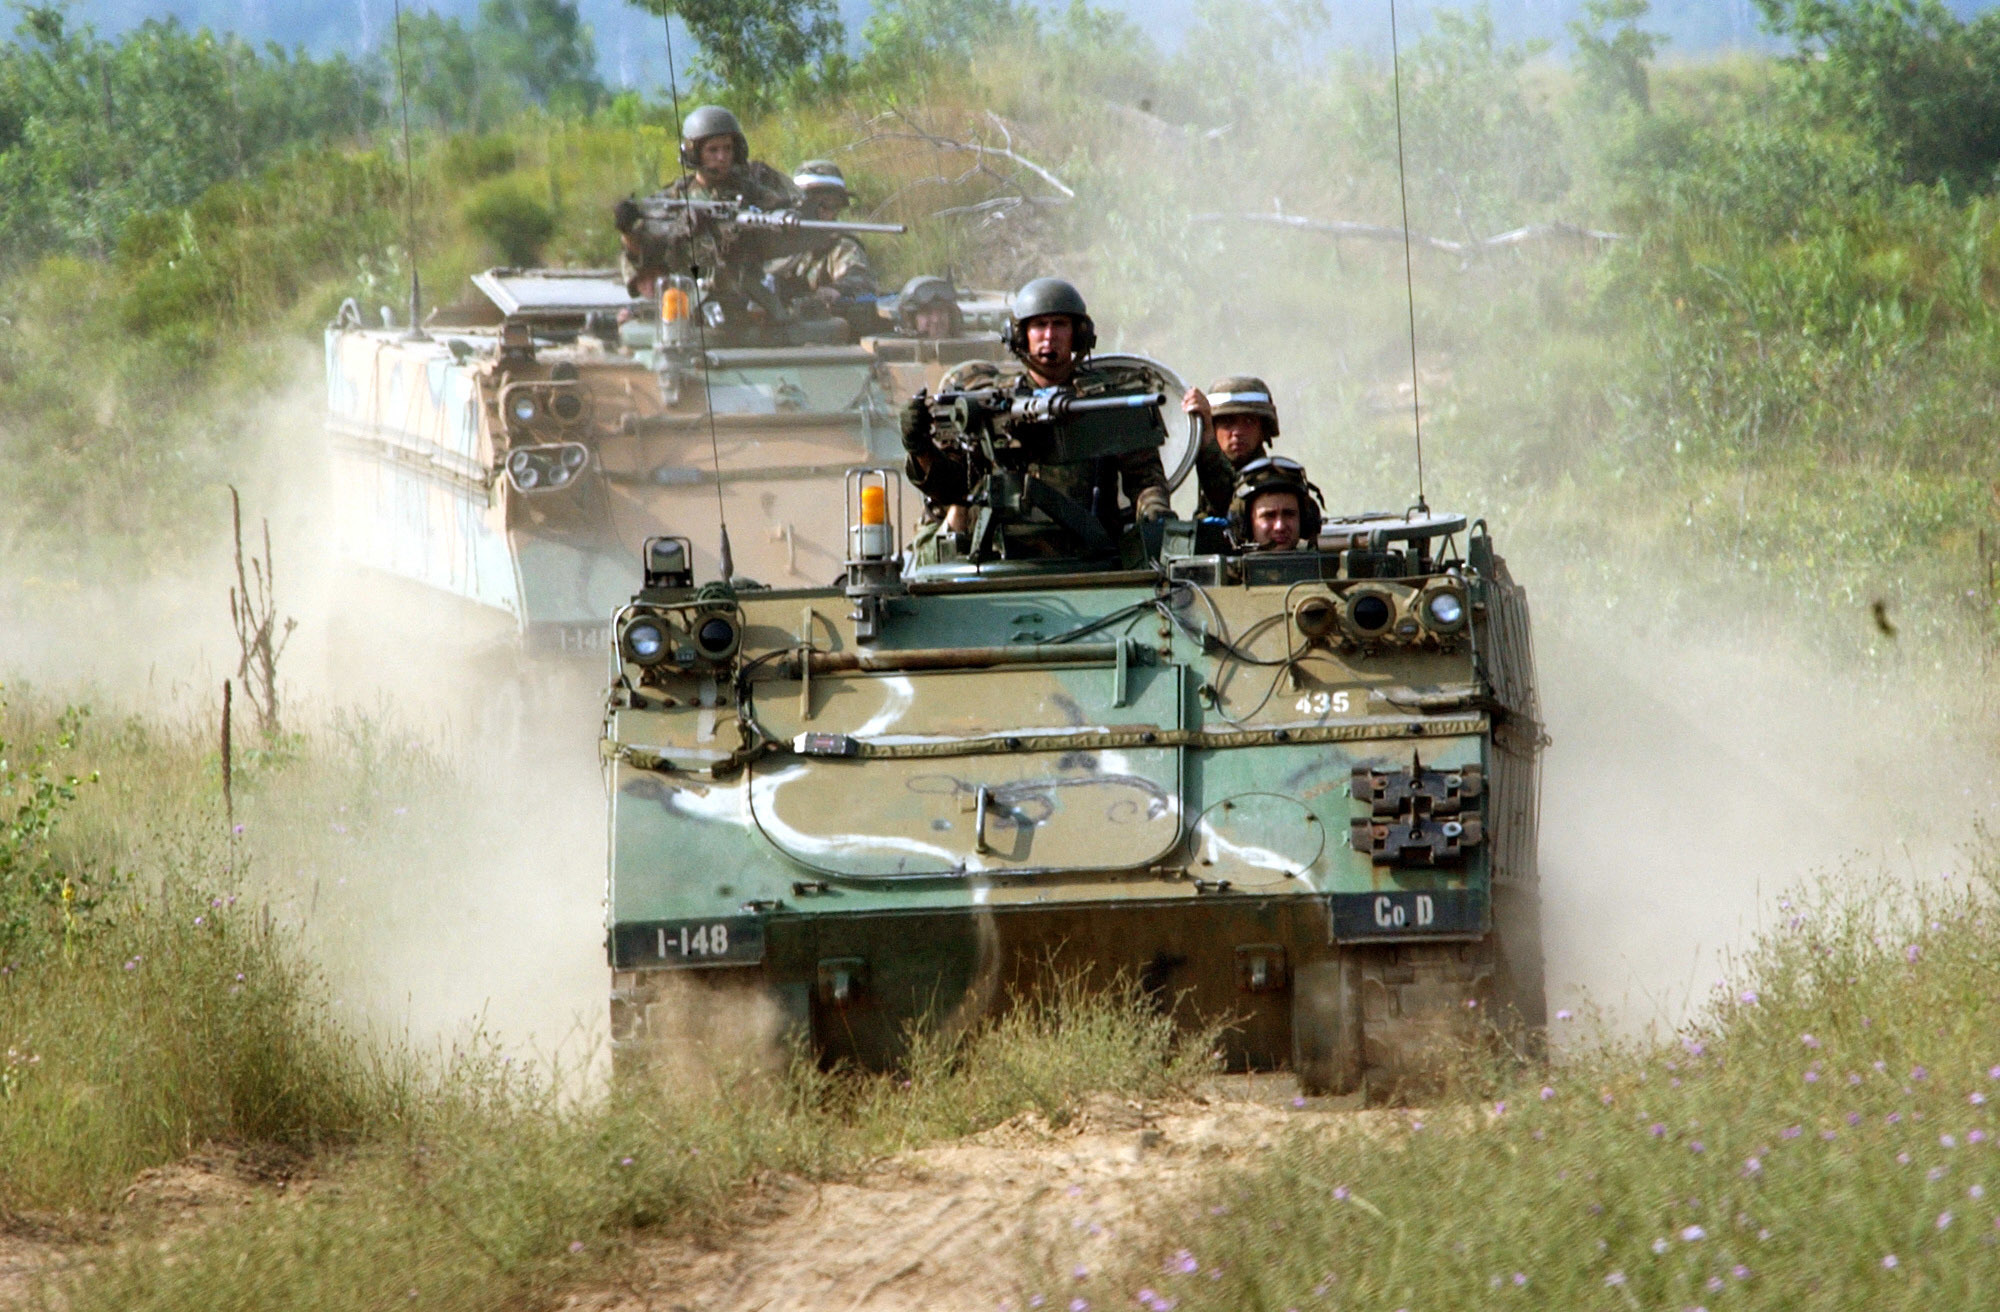 An M113 Armored Personnel Carrier of Company D, 1st Battalion, 148th Infantry, 37th Brigade, 38th Infantry Division moves into position during a platoon live-fire exercise at Camp Grayling Mich., July 2005.